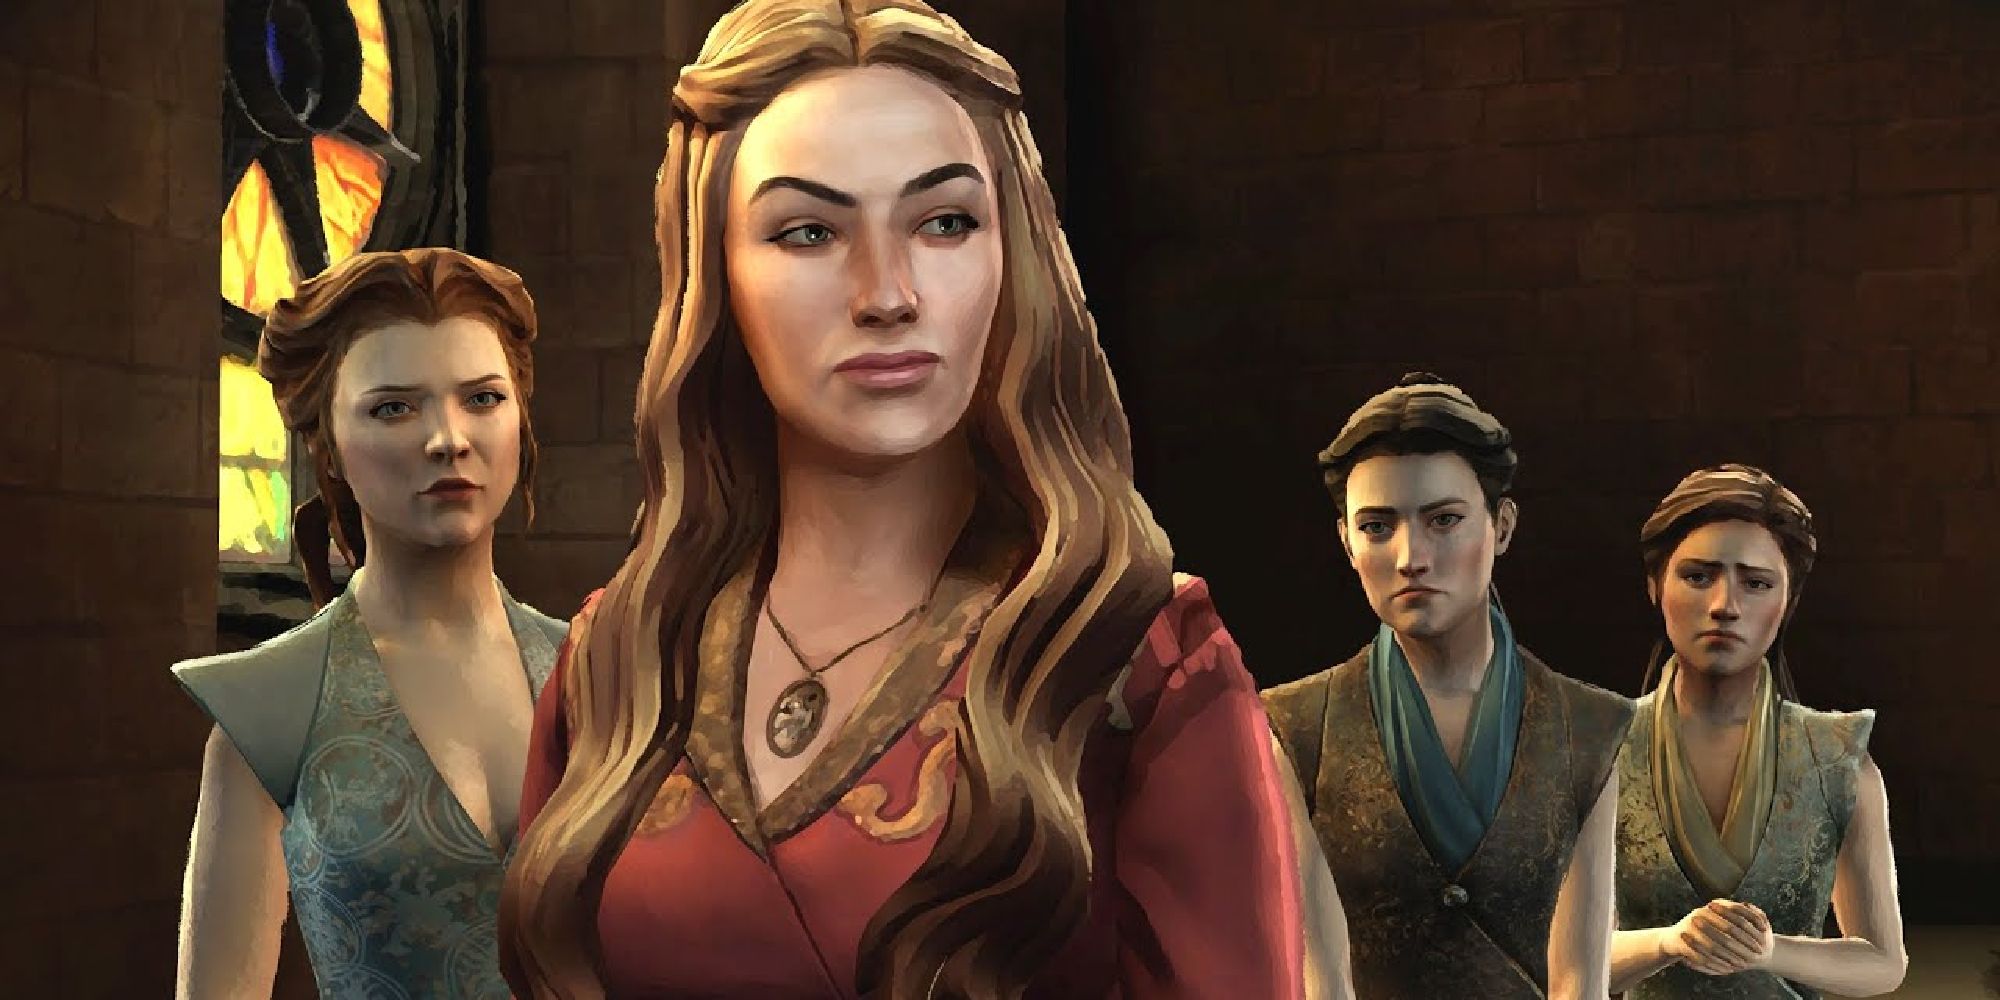 Cersei, Margaery and two original characters all in a palace room together.